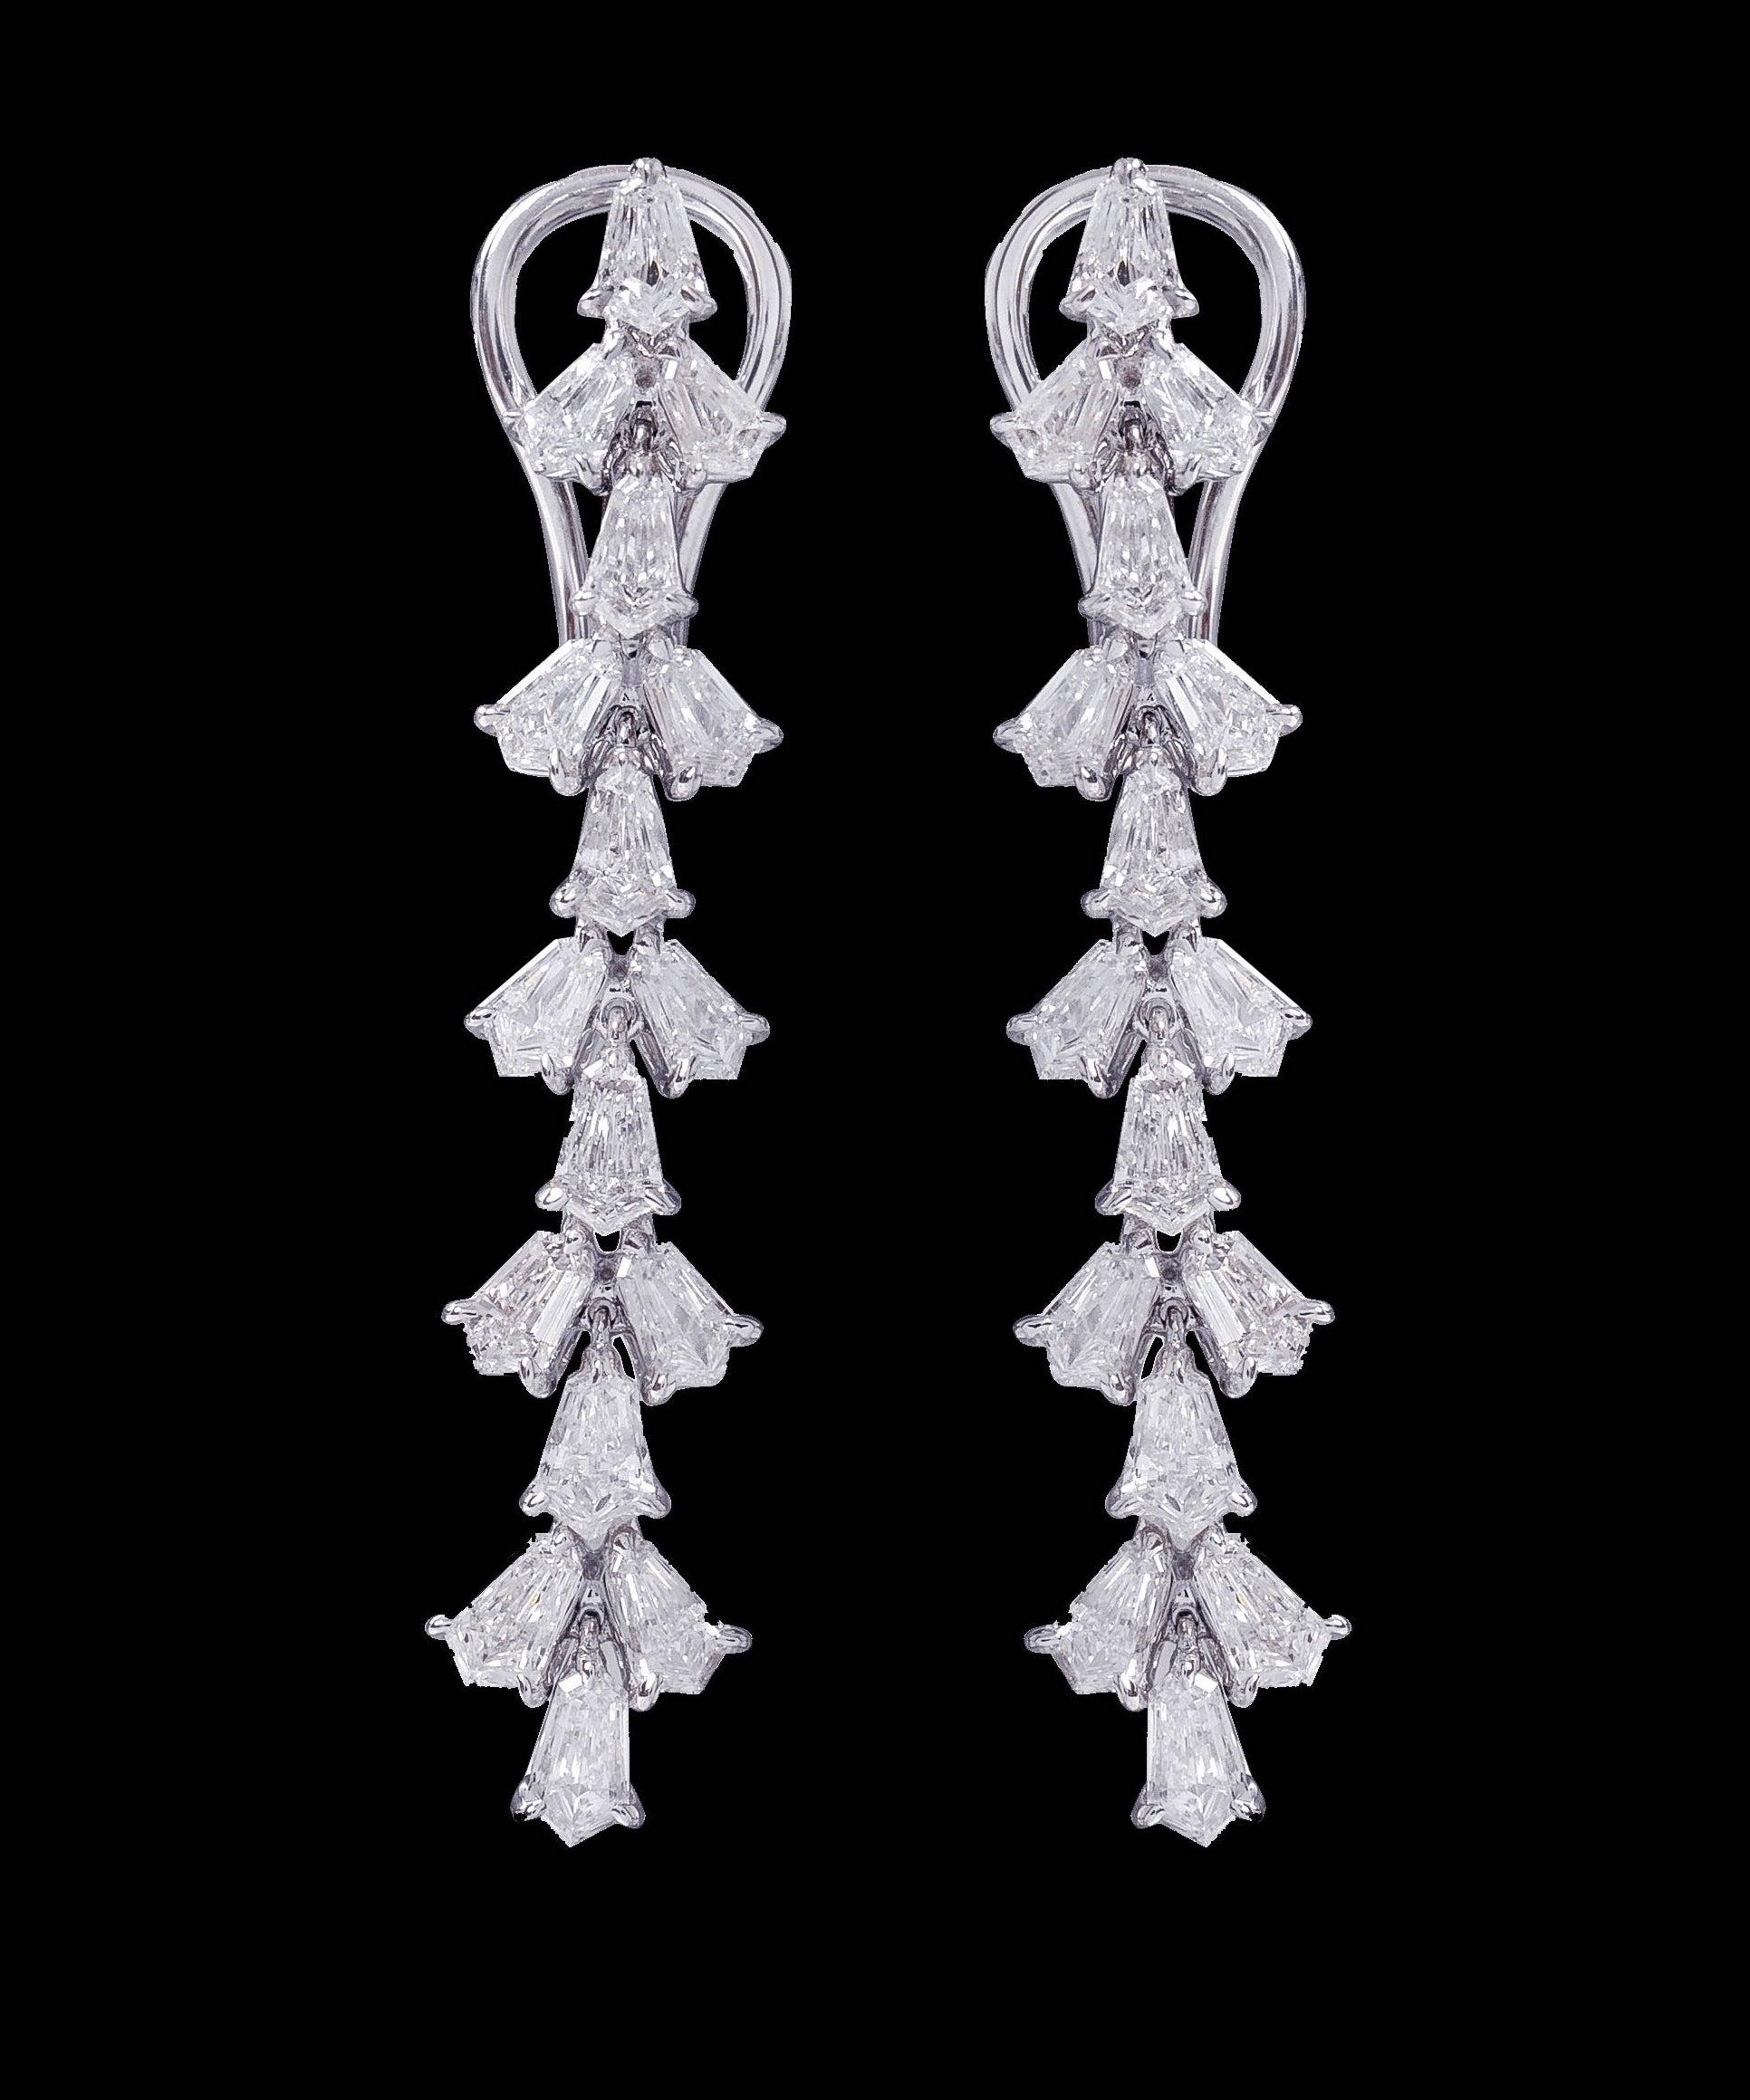 18 Karat White Gold 4.55 Carat Diamond Kite-Cut Masterpiece Earrings

This stylish long special tie-cut diamond earring is exemplary. The design is inspired by the flying wings idea with the remarkable angling of all the 30 solitaire tie-cut